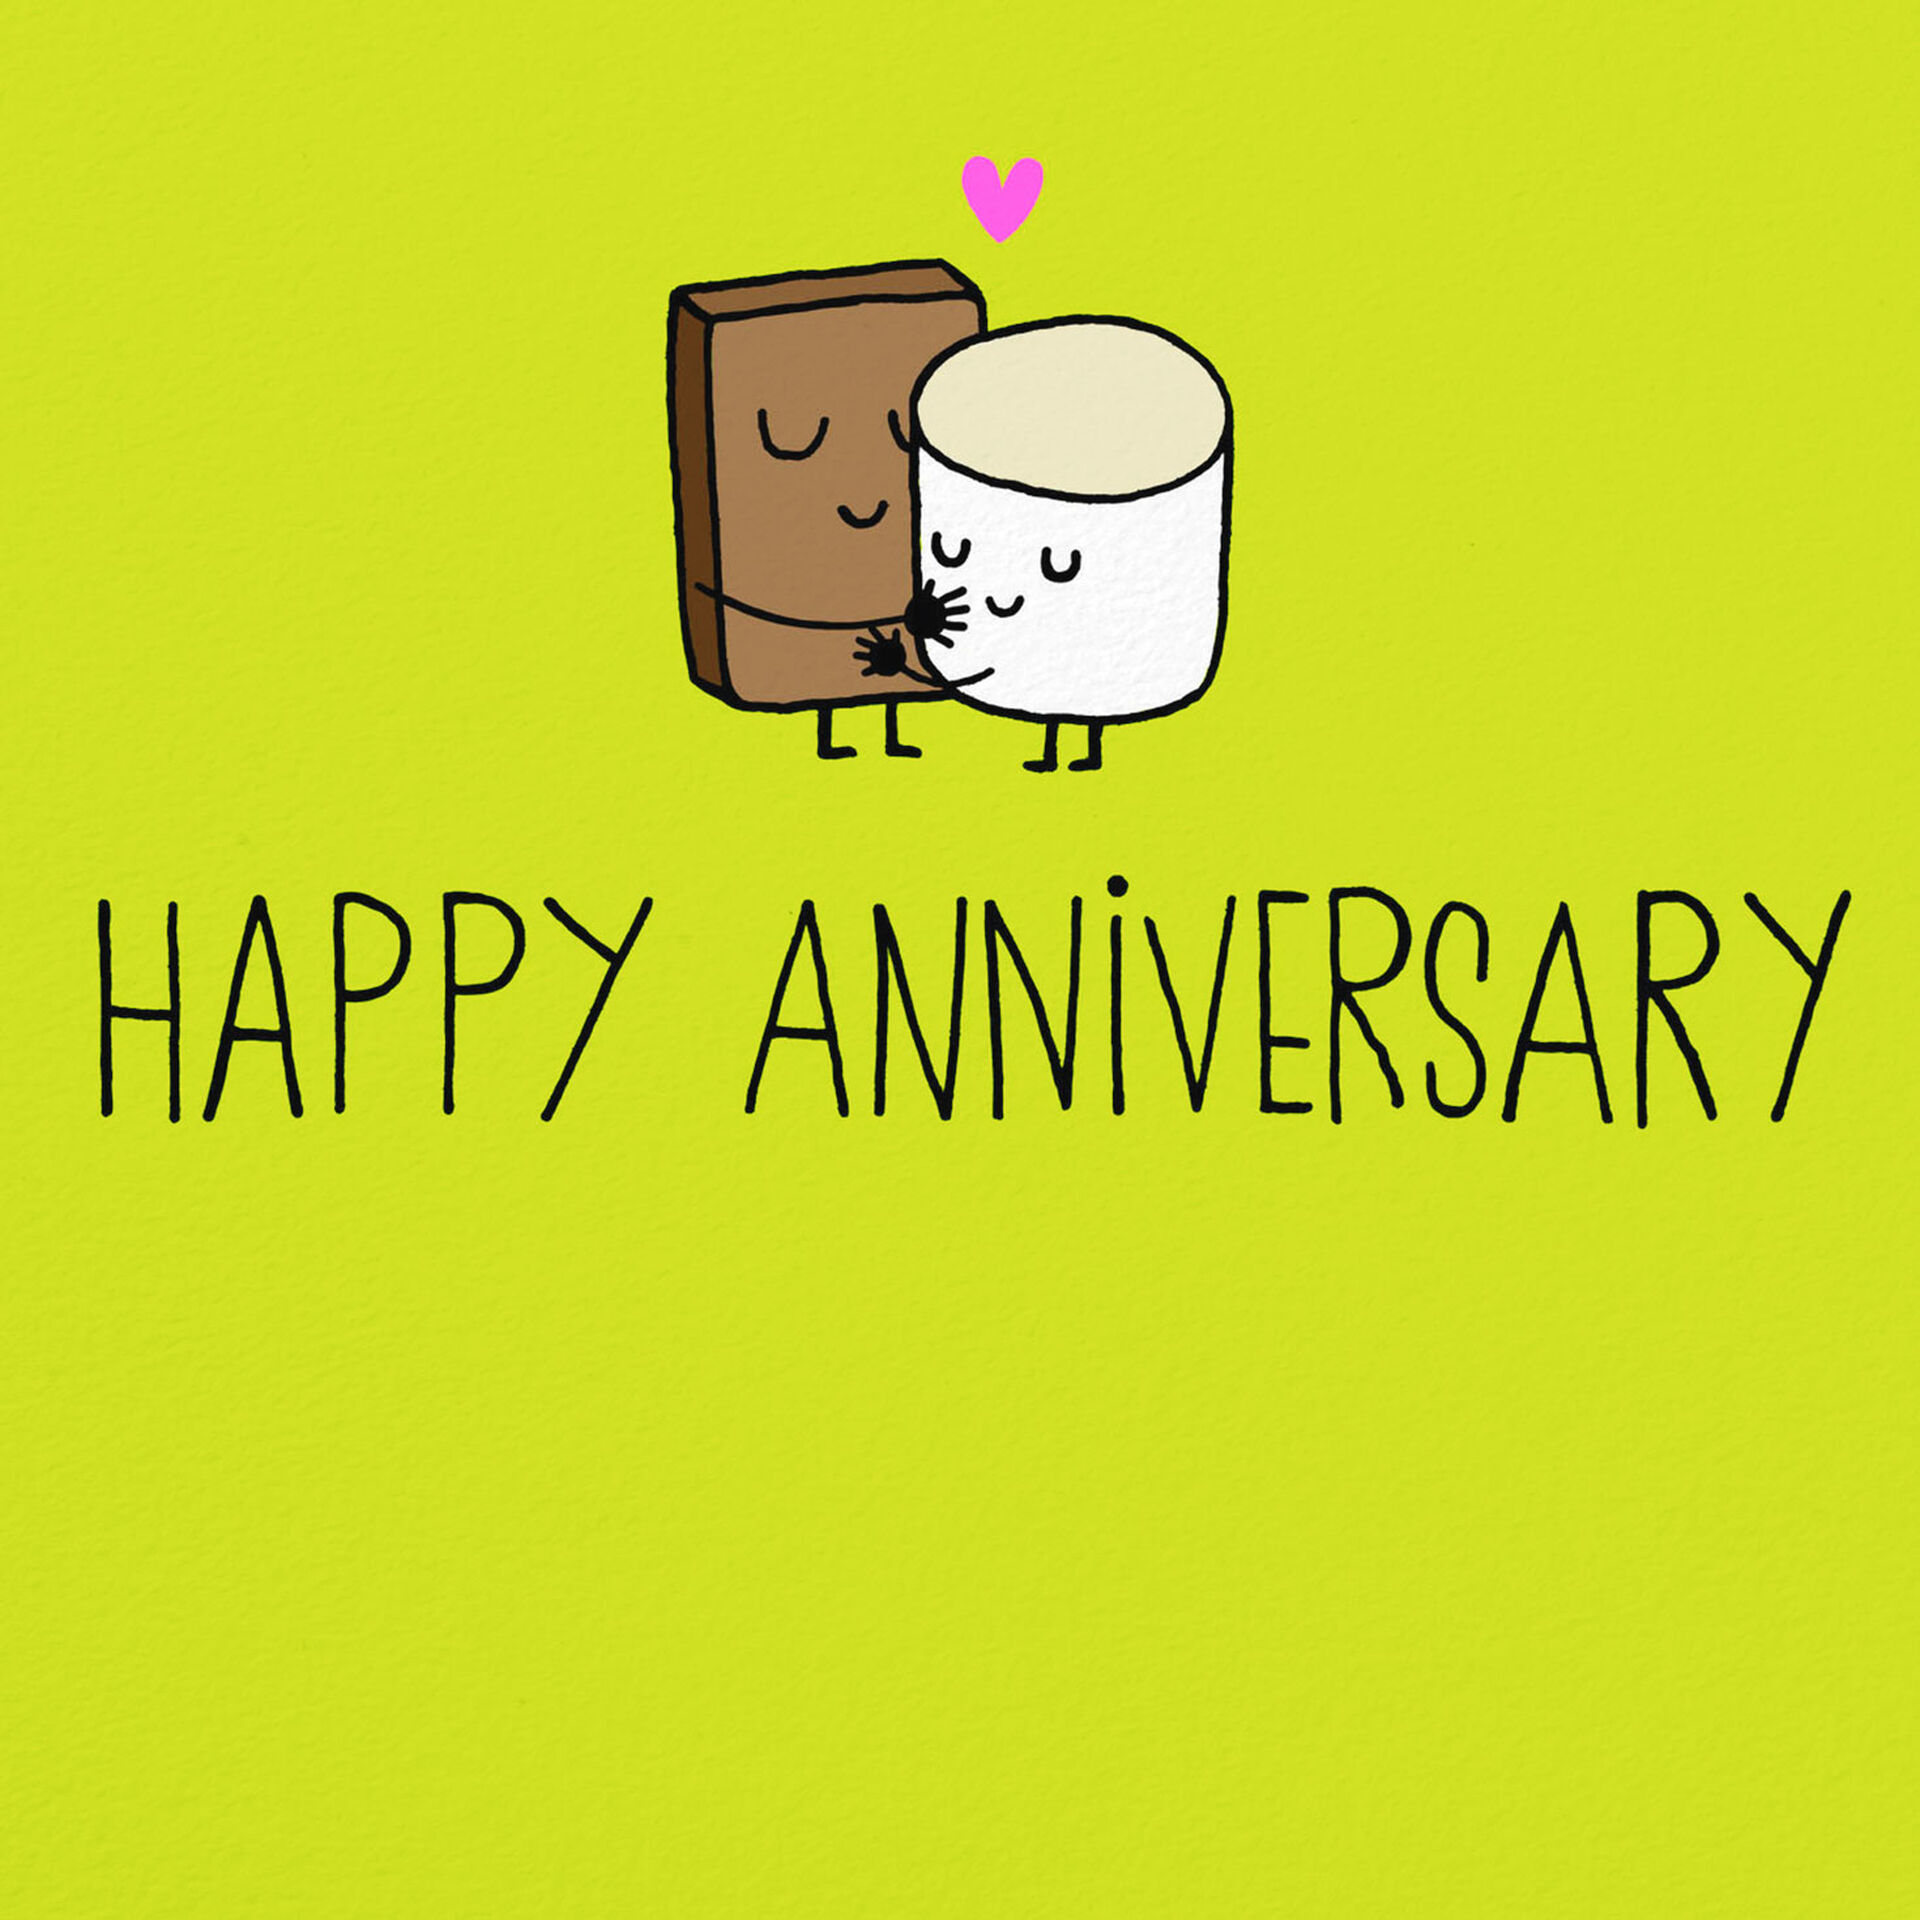 Marshmallow-and-Chocolate-Smores-Anniversary-Card_359YYS1445_02